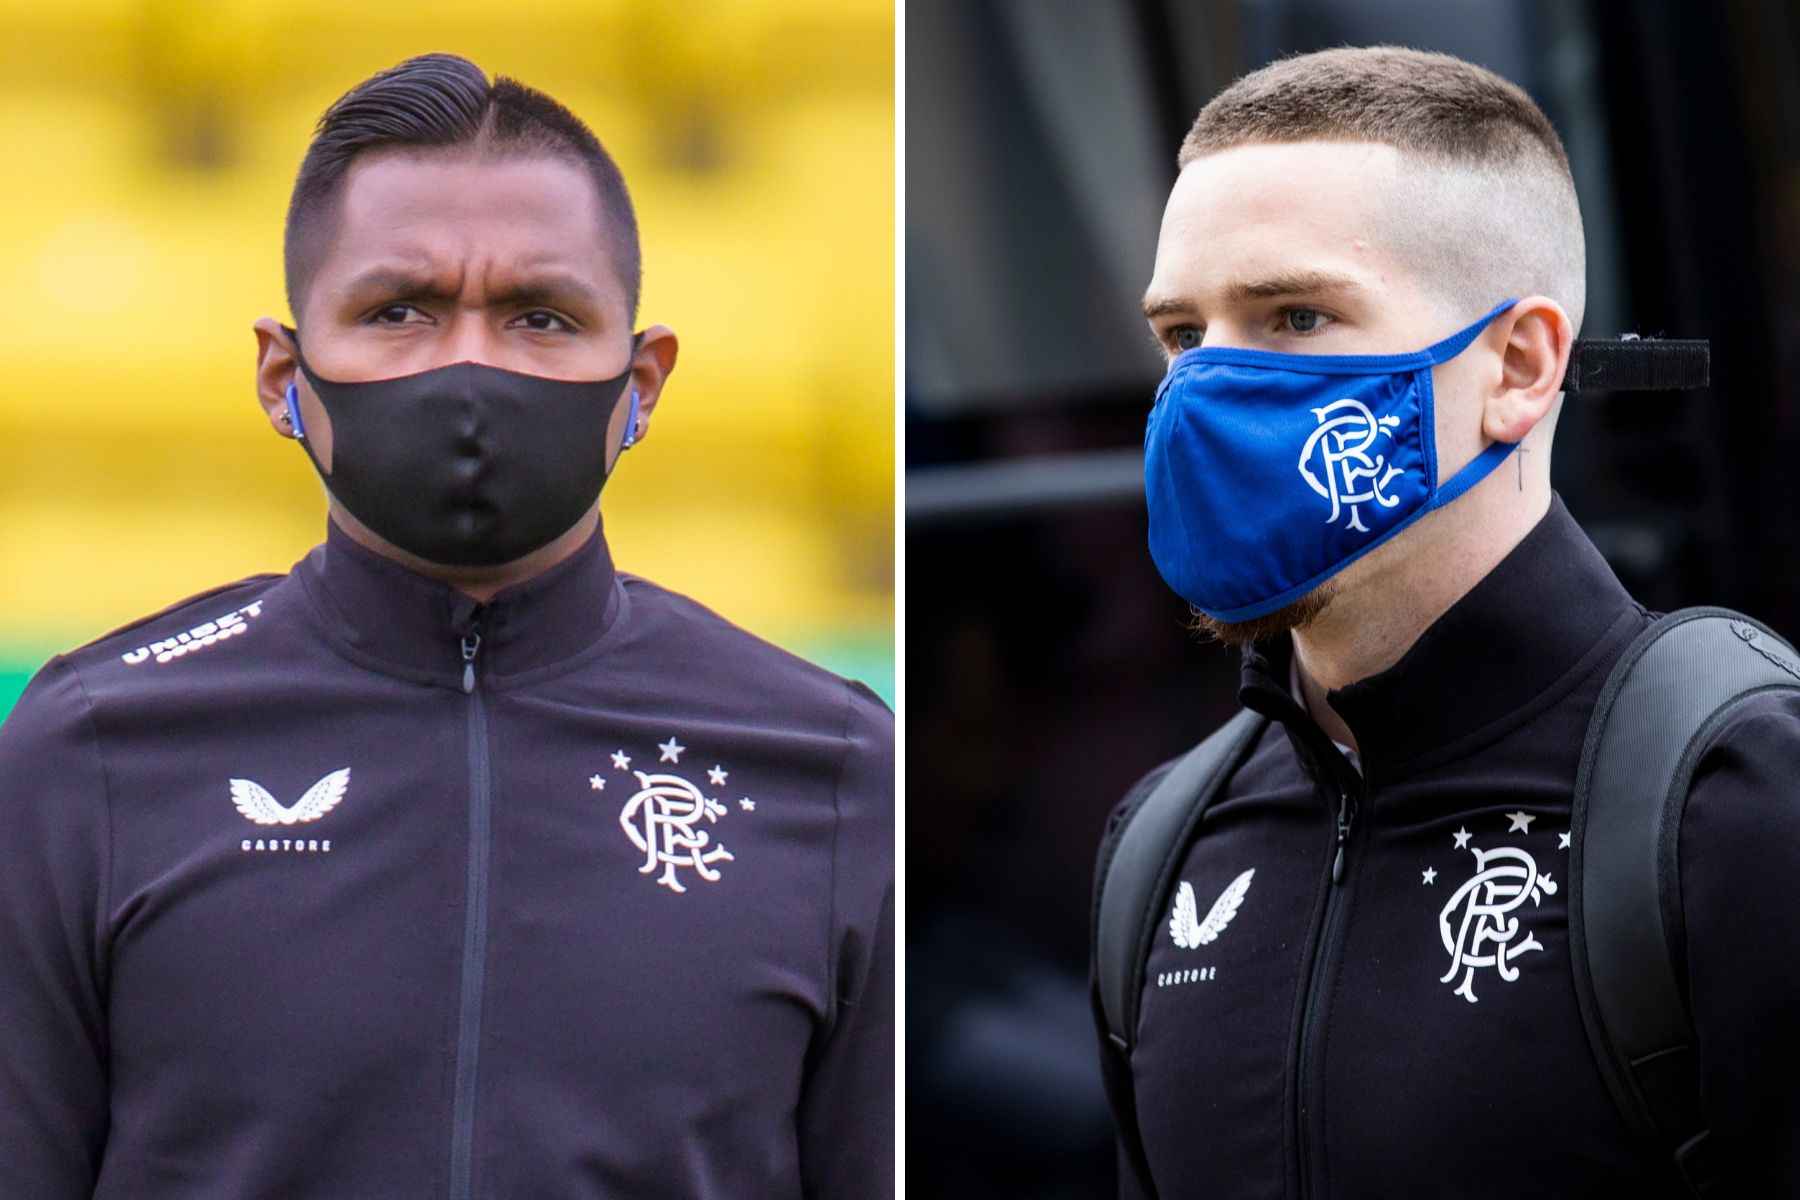 Ryan Kent and Alfredo Morelos are not crucial to Rangers' title bid, says ex-Celtic manager